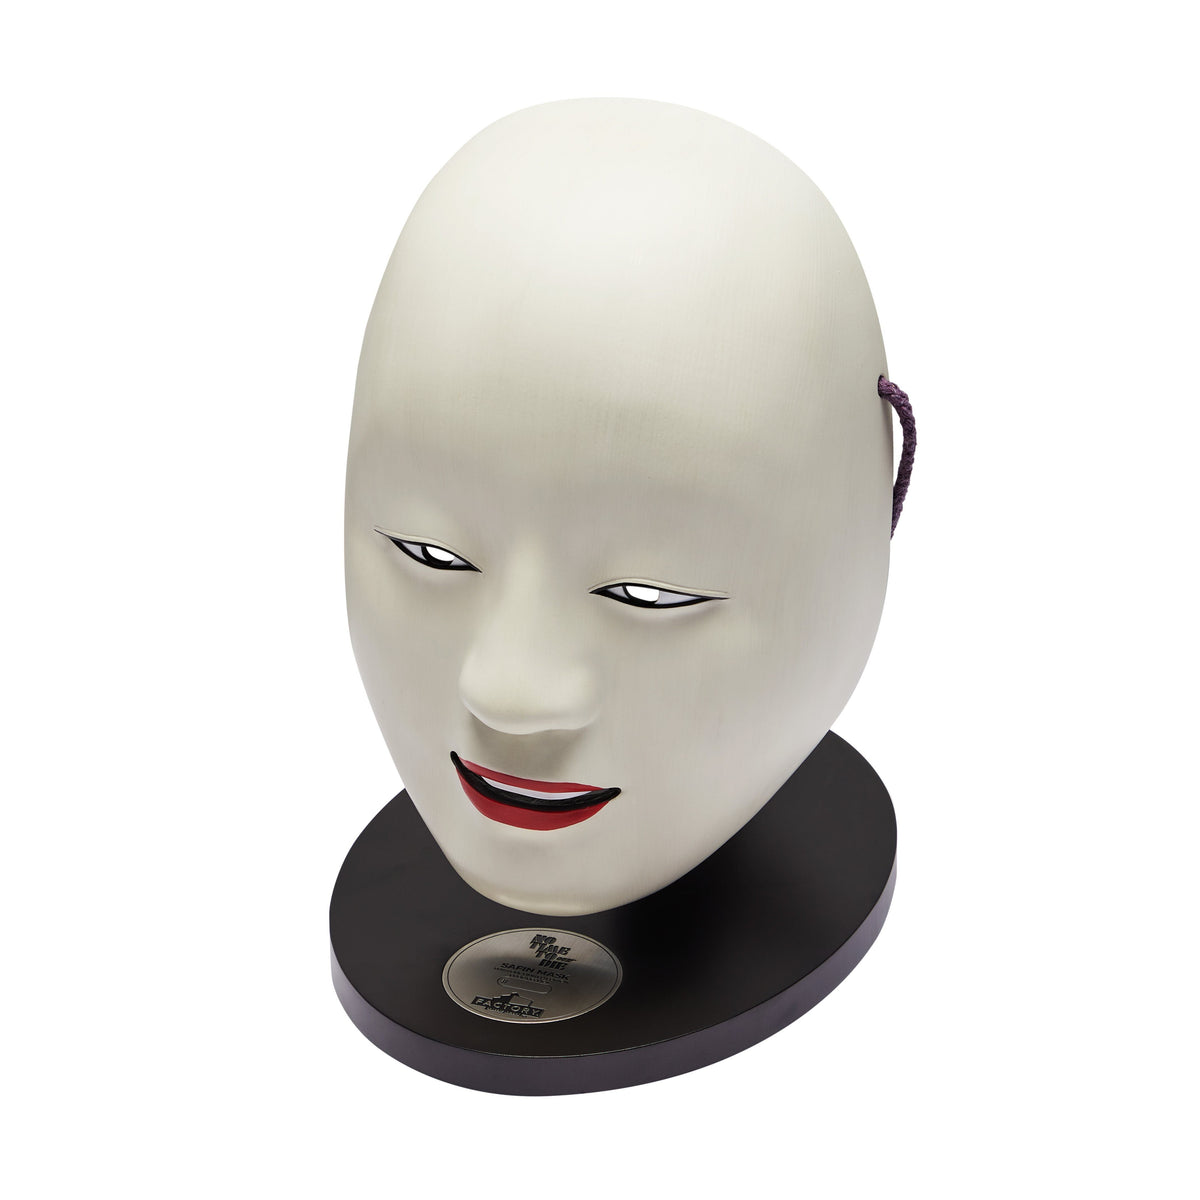 James Bond Safin Mask Prop Replica - No Time To Die Numbered Edition PROP REPLICA FACTORY 